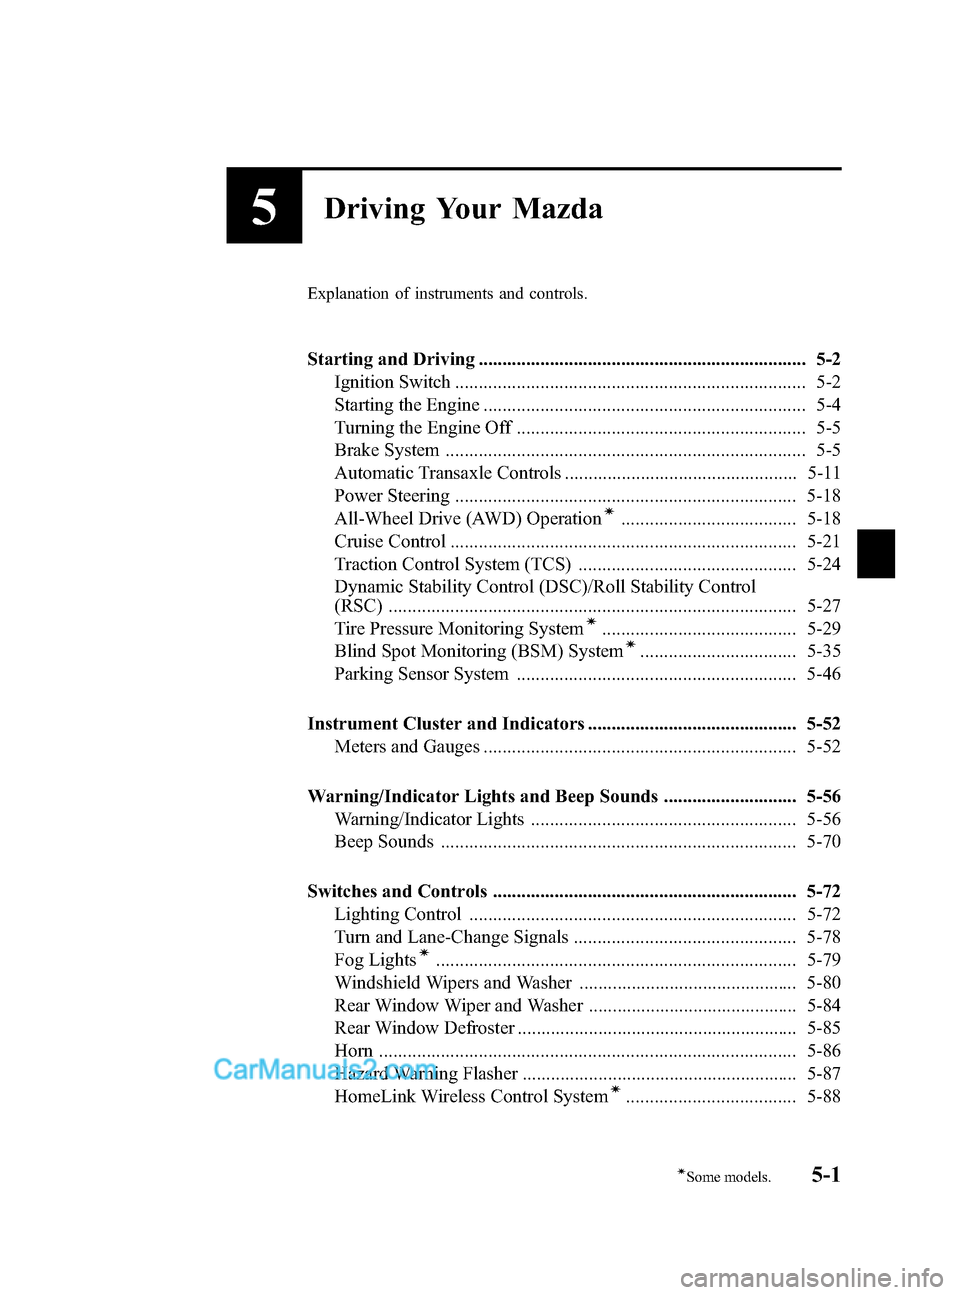 MAZDA MODEL CX-9 2014  Owners Manual (in English) Black plate (177,1)
5Driving Your Mazda
Explanation of instruments and controls.
Starting and Driving ..................................................................... 5-2Ignition Switch .........